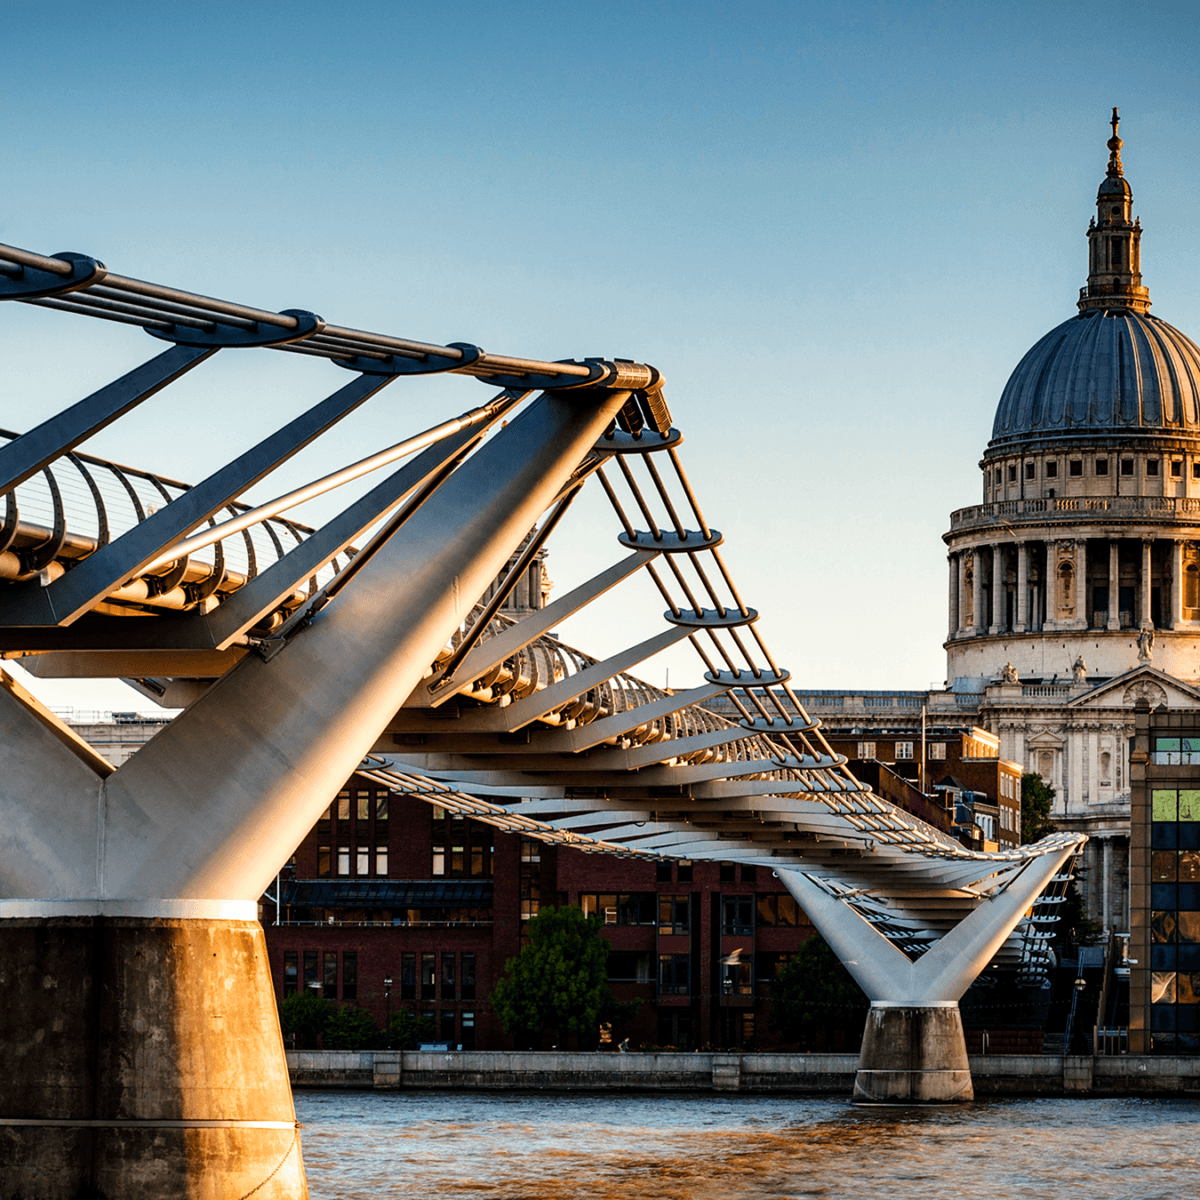 An image of St Paul's cathedral taken from across the river Thames with the millennium bridge in the foreground